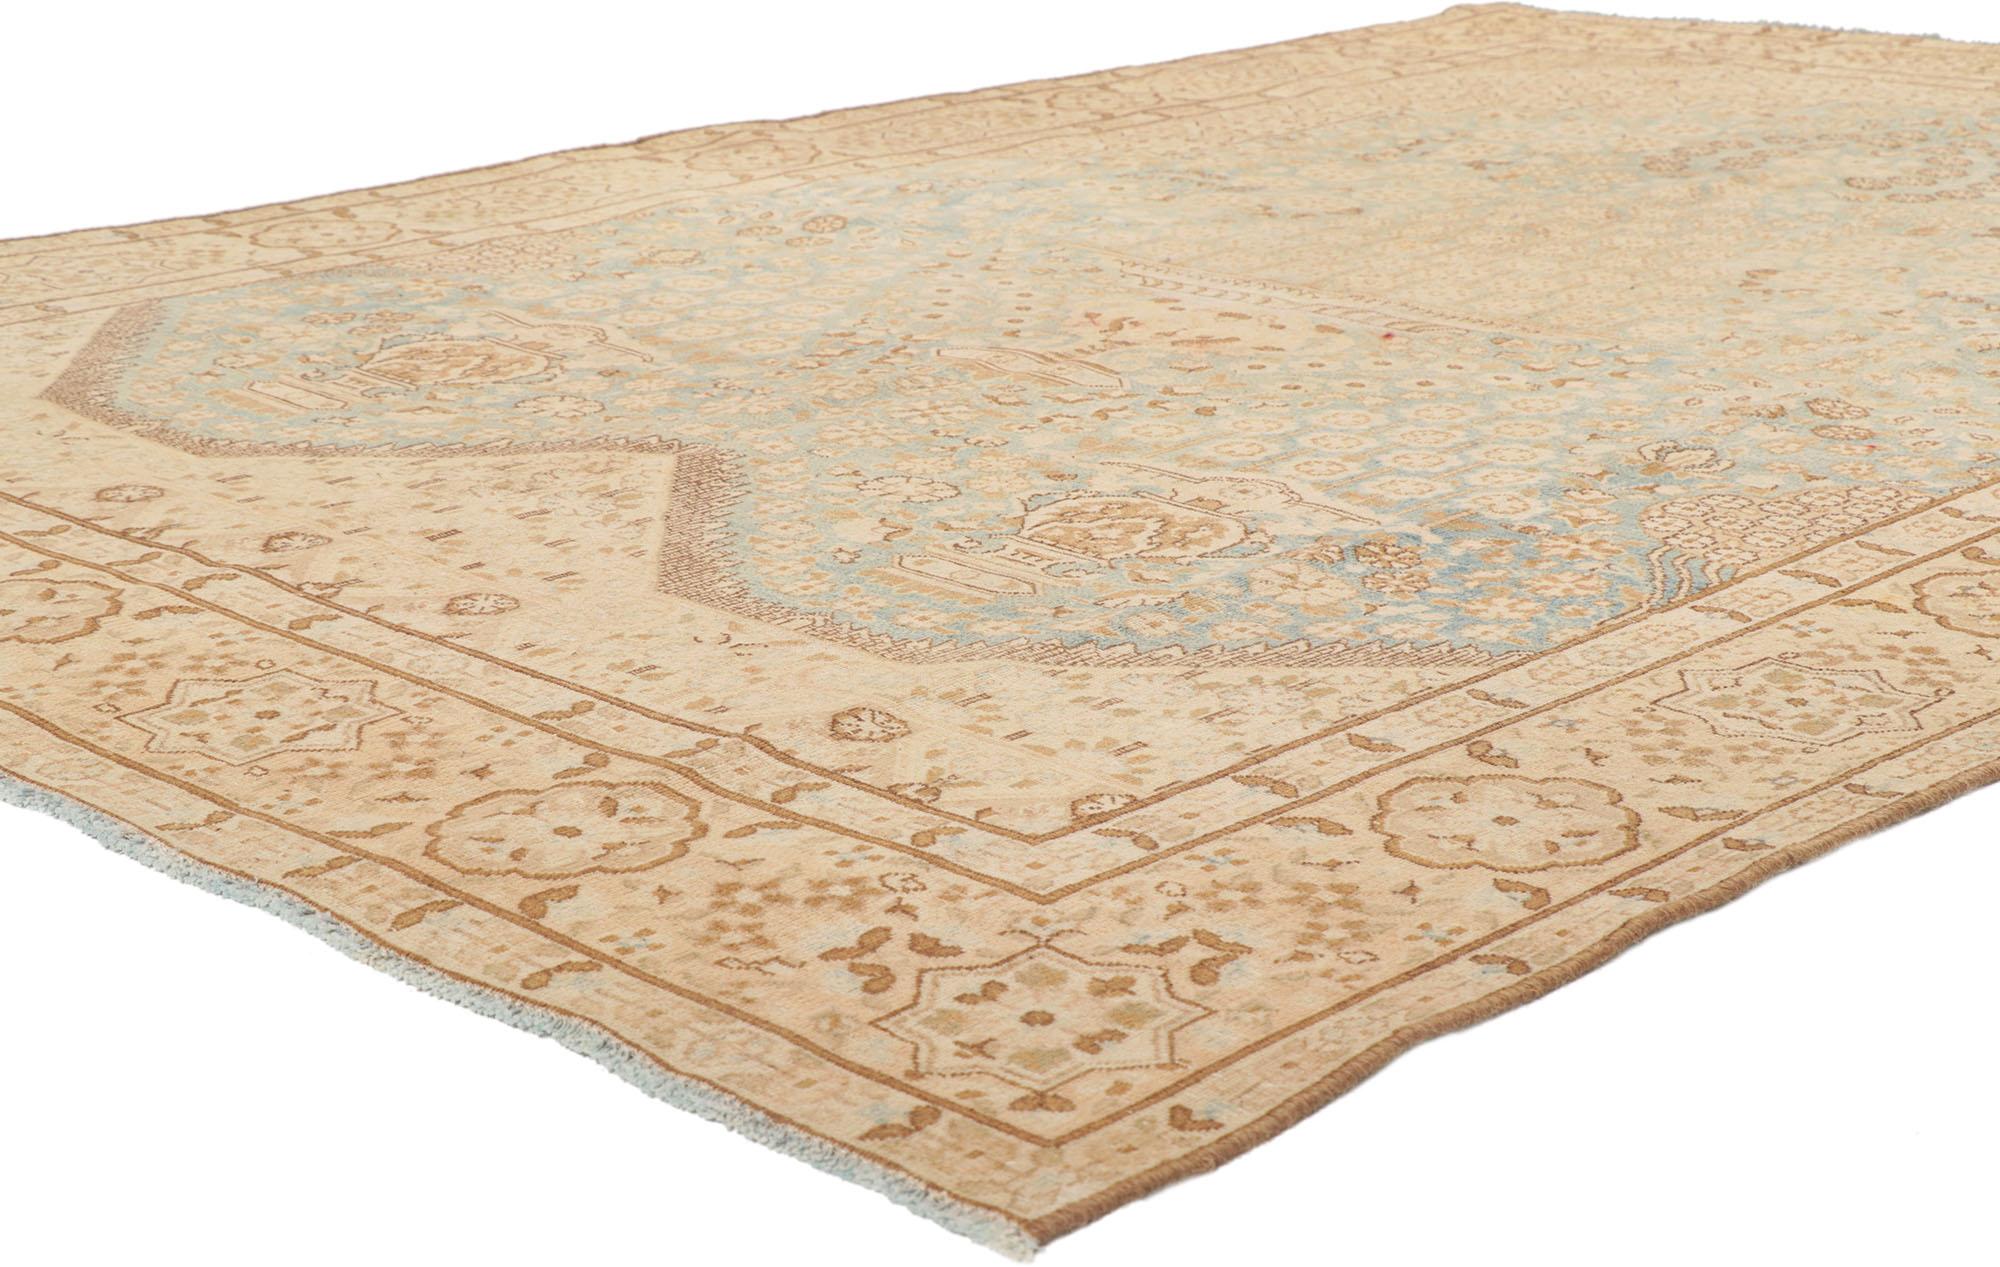 53739 Antique Persian Kerman Rug, 06'08 x 09'10.
Quiet sophistication meets relaxed refinement in this hand knotted wool antique Persian Kerman rug. Get ready to be transported to a peaceful and captivating place with this antique Persian Kerman rug